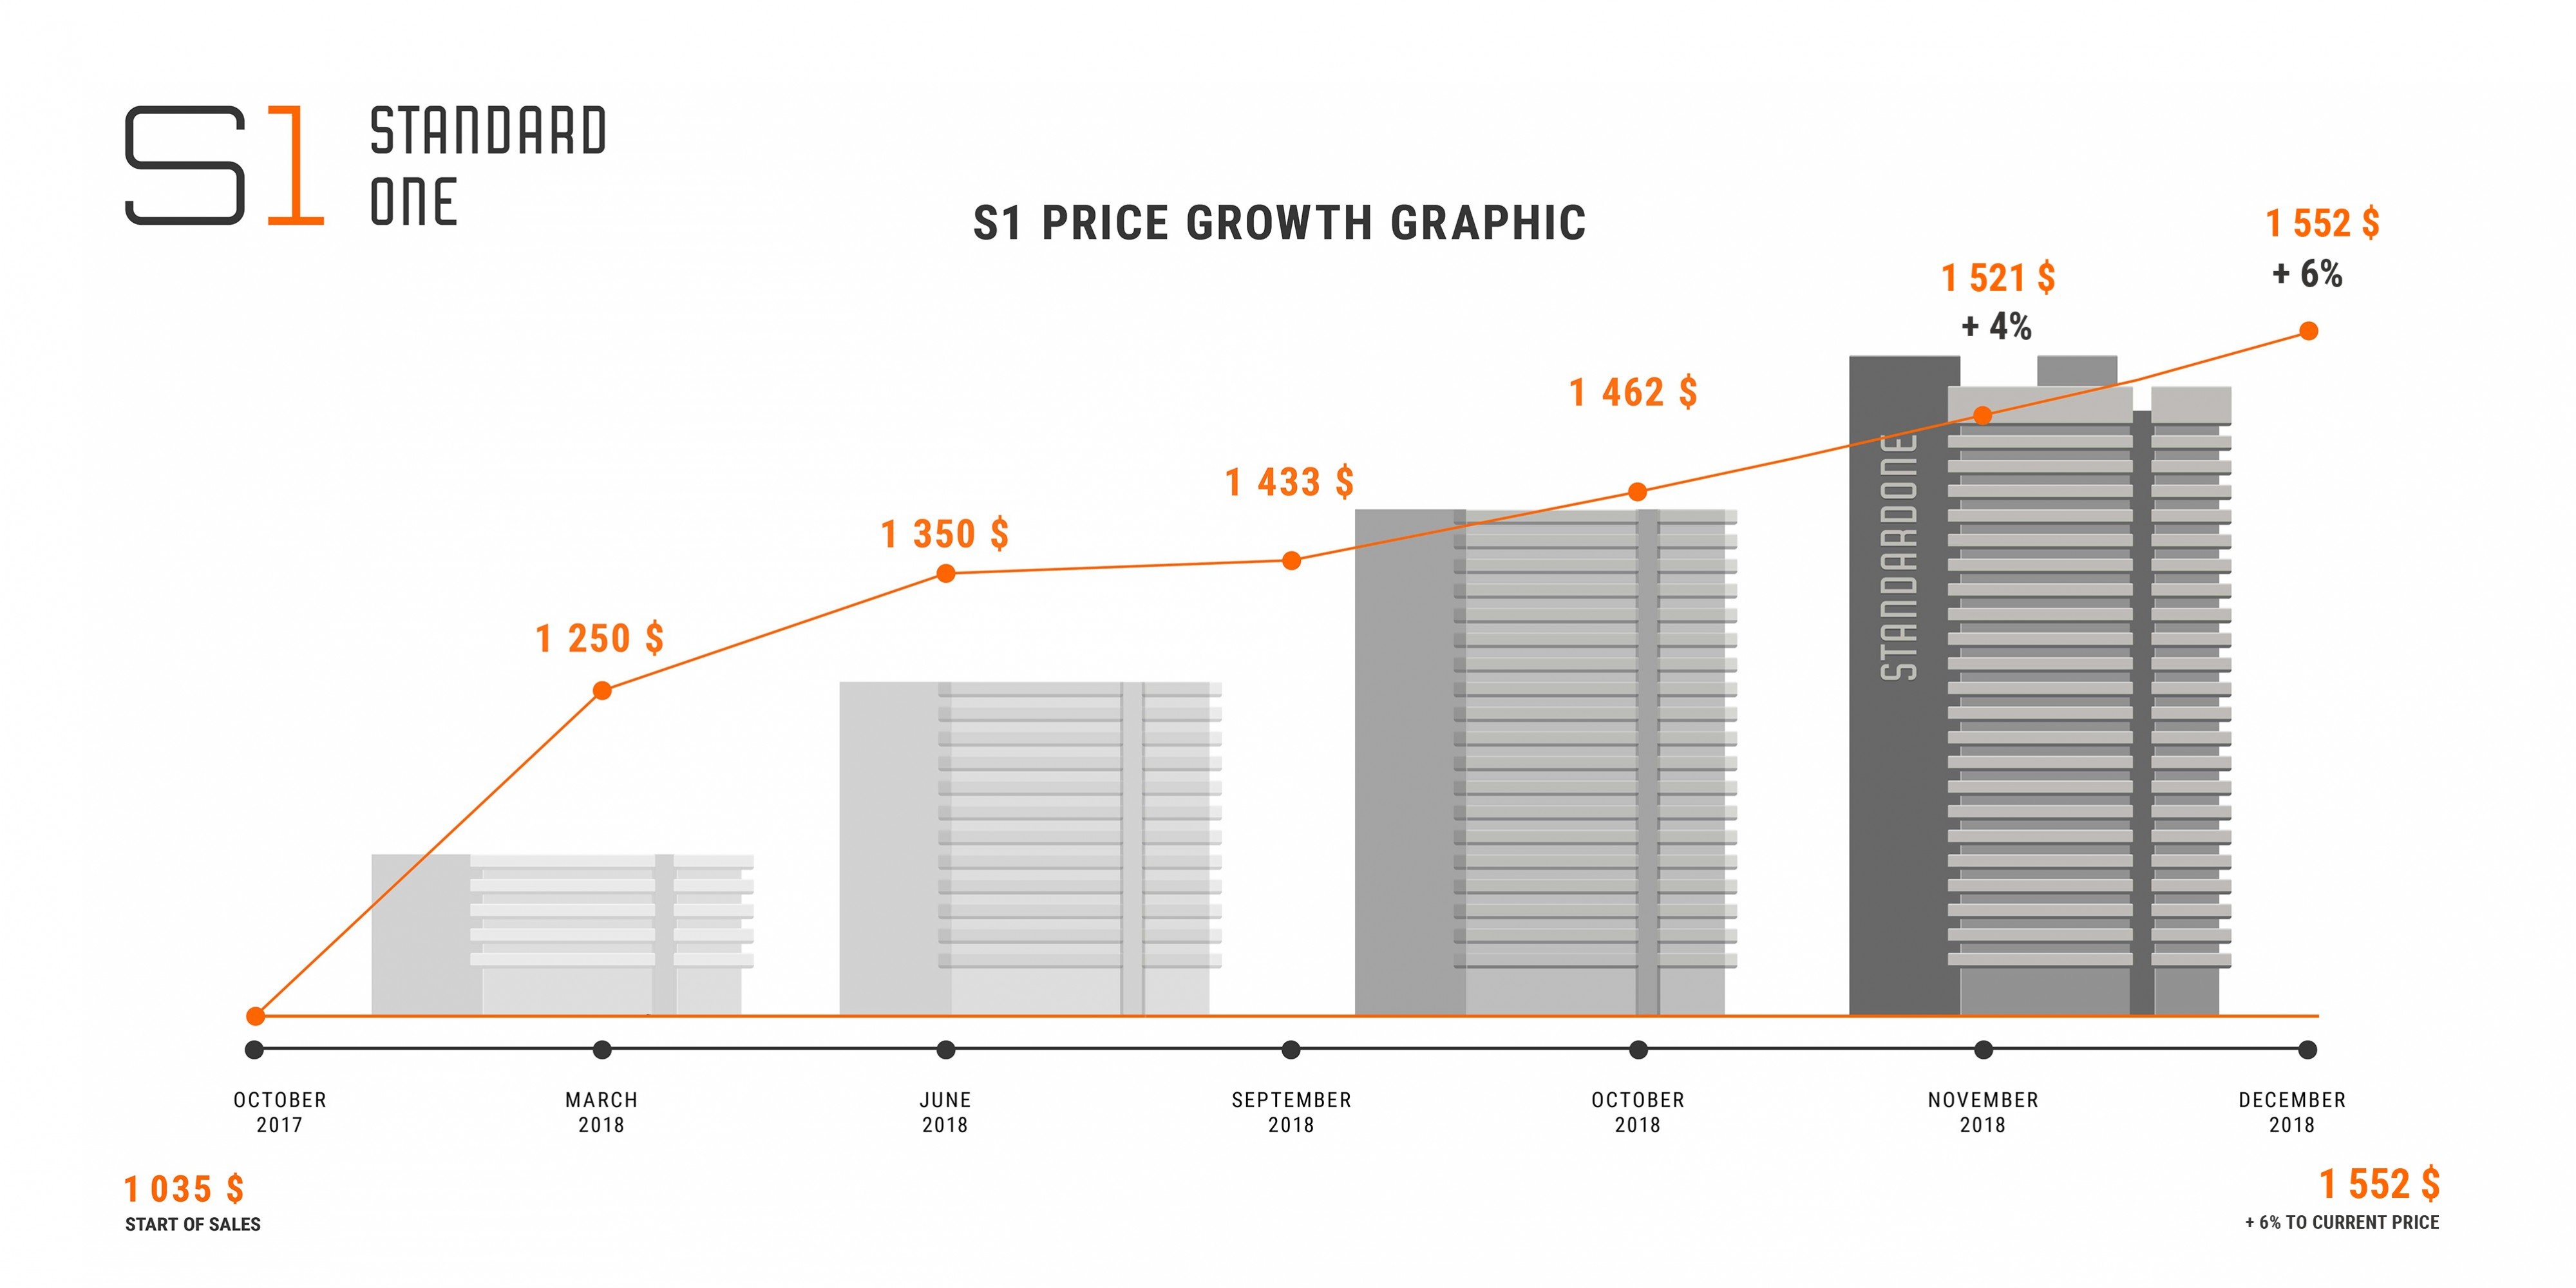 Price growth graphic